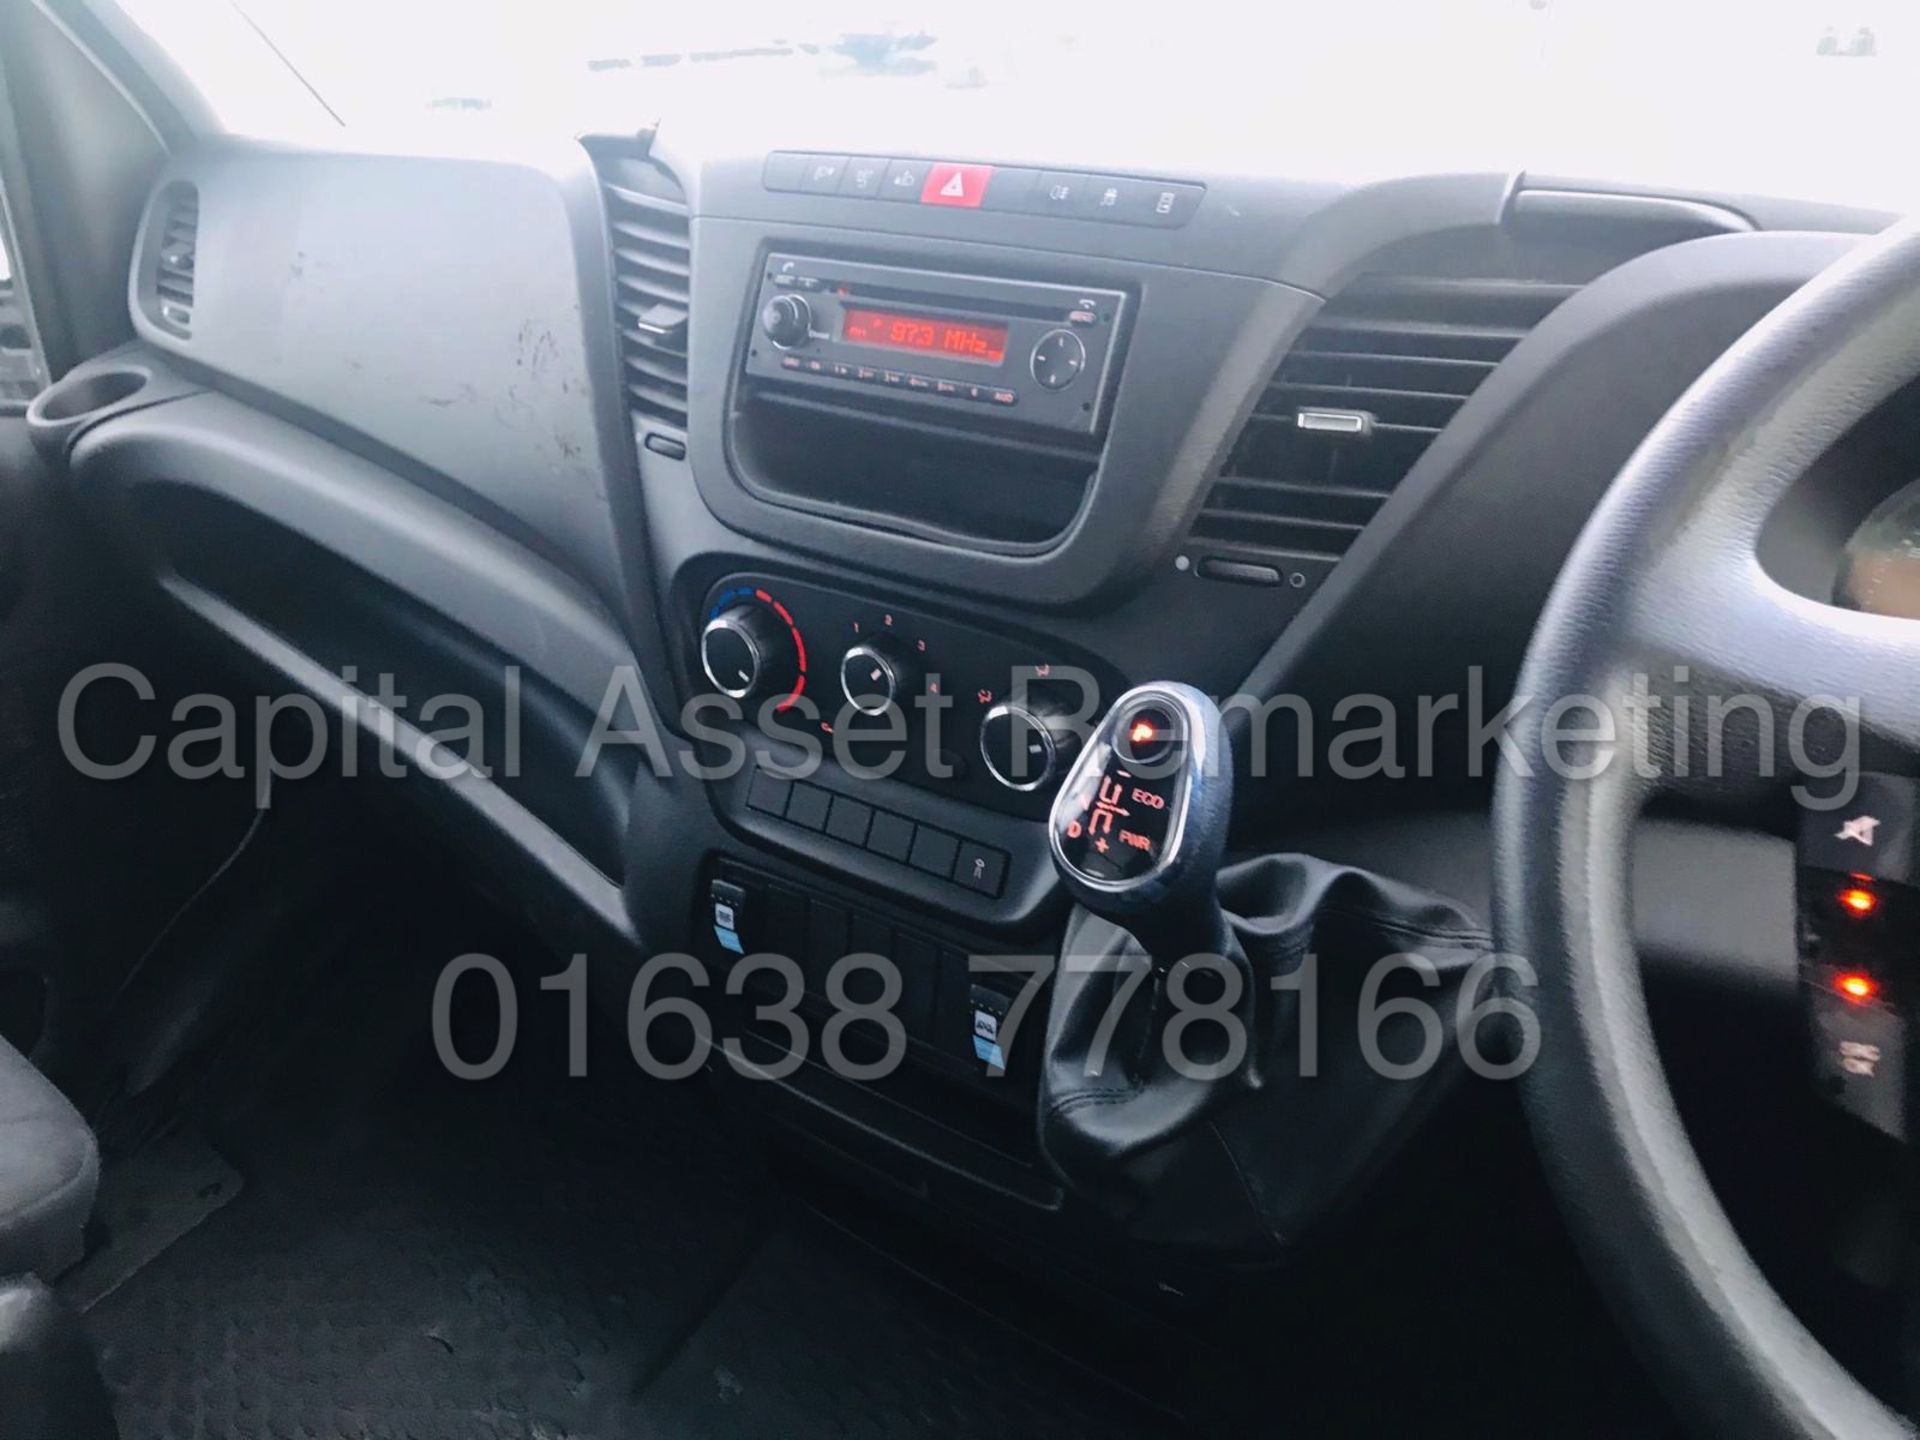 (ON SALE) IVECO DAILY 35S11 *LWB - REFRIGERATED BOX* (2015 - NEW MODEL) '2.3 DIESEL - 8 SPEED AUTO' - Image 22 of 37